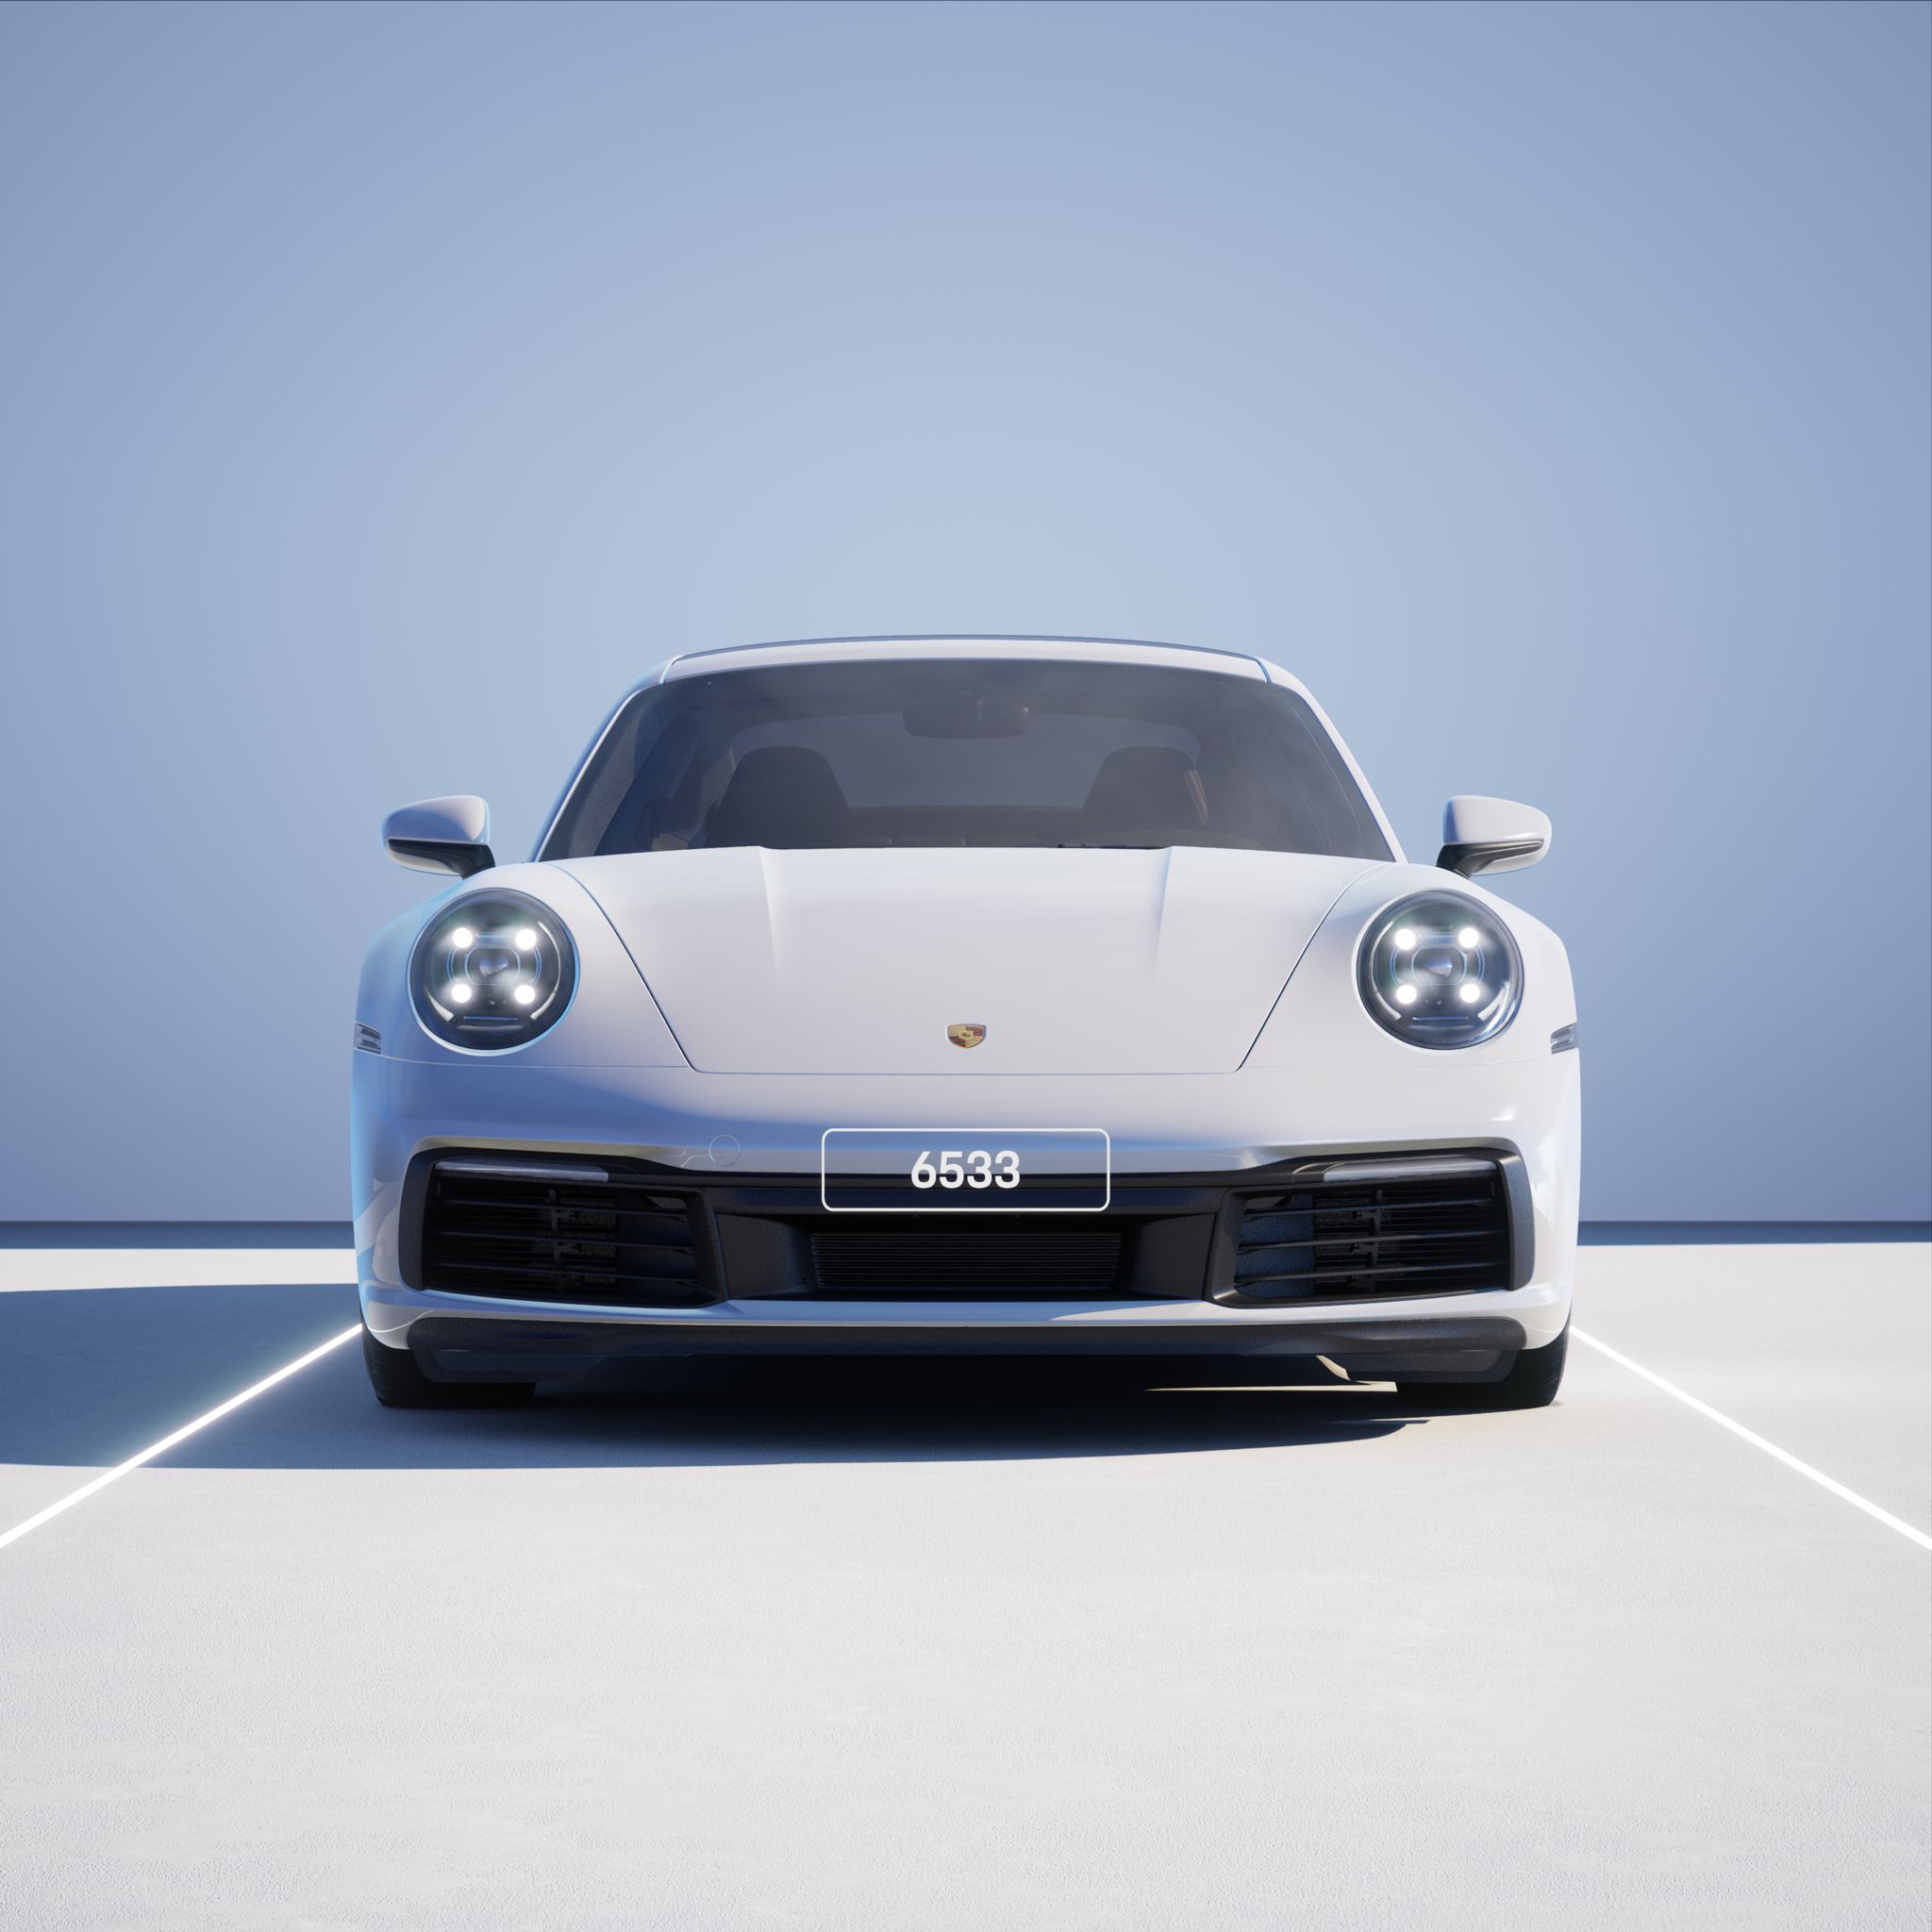 The PORSCHΞ 911 6533 image in phase